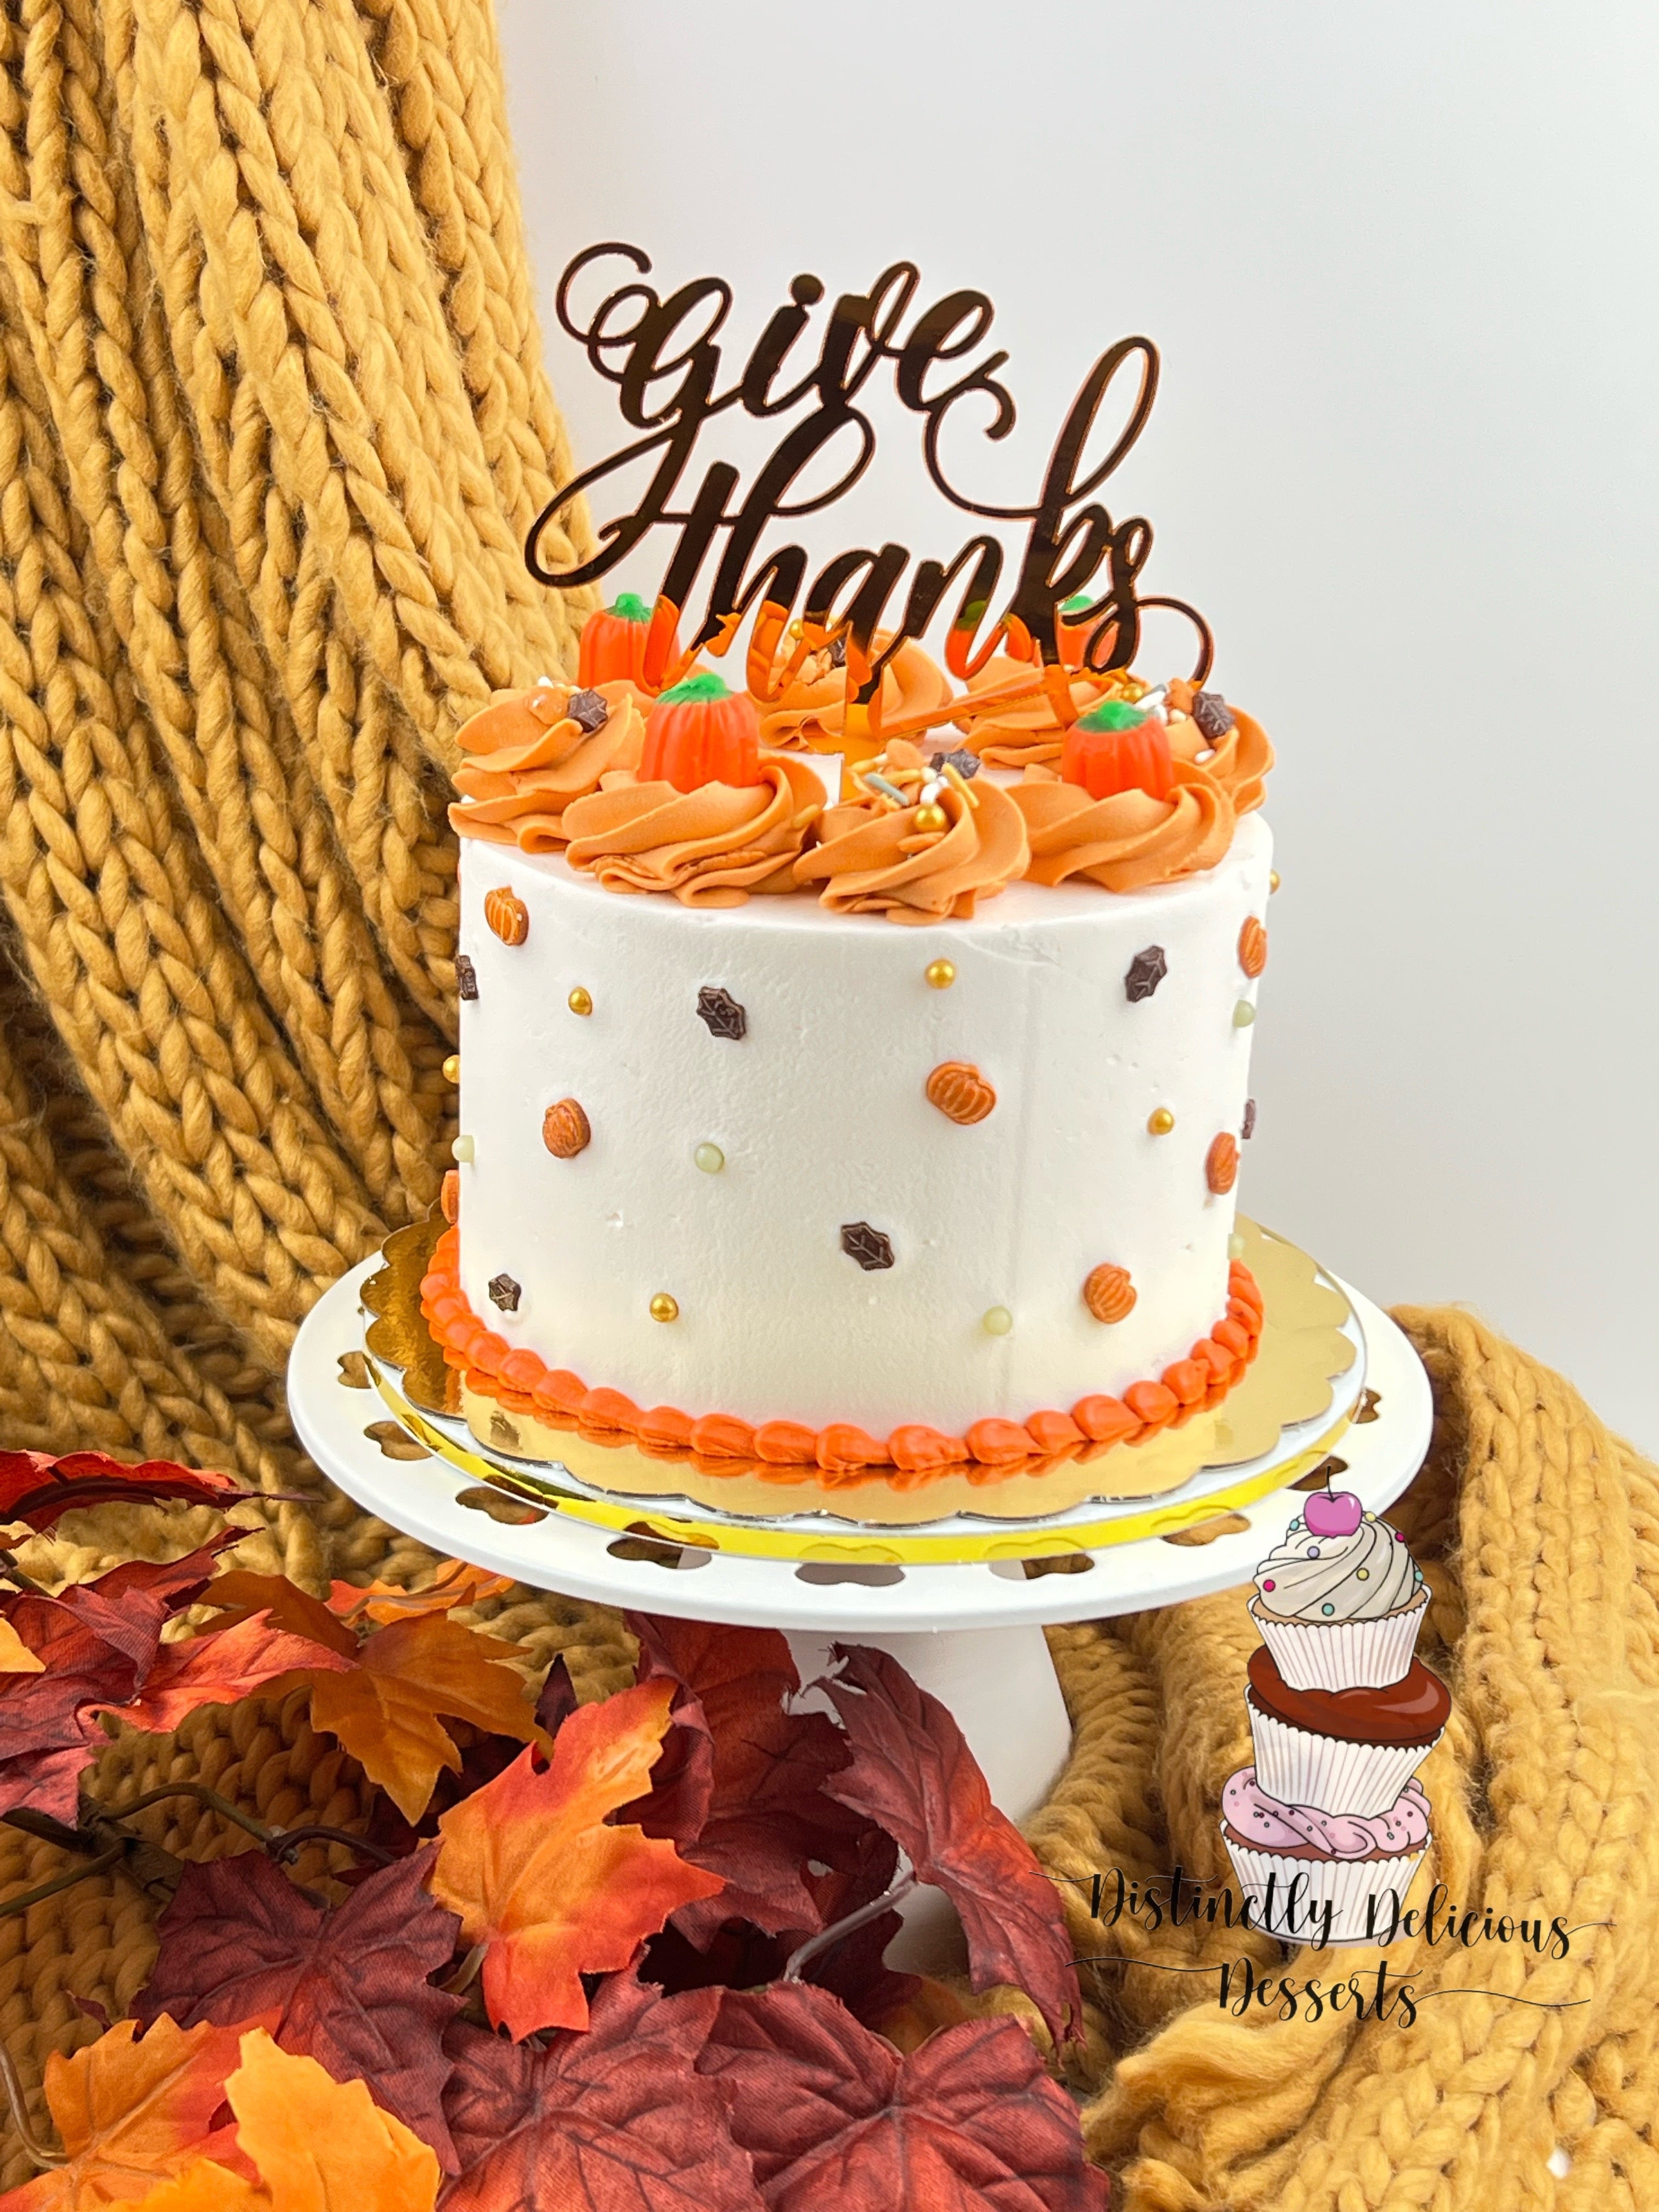 Give Thanks Cake Decorating Class (Sun. 11/19)